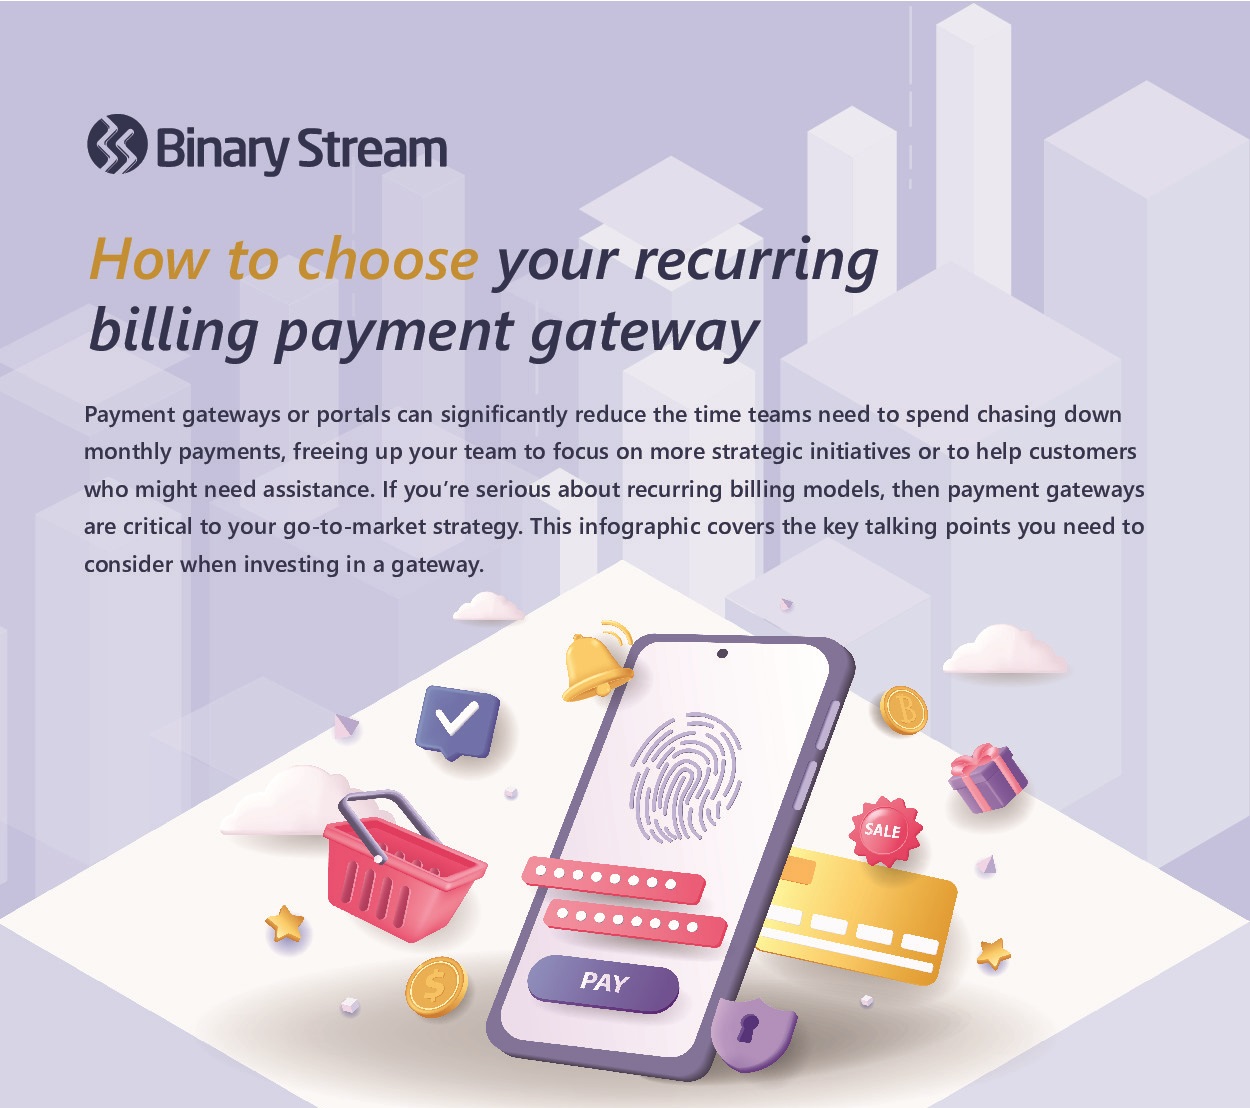 (Infographic) How to Choose Your Recurring Billing Payment Gateway